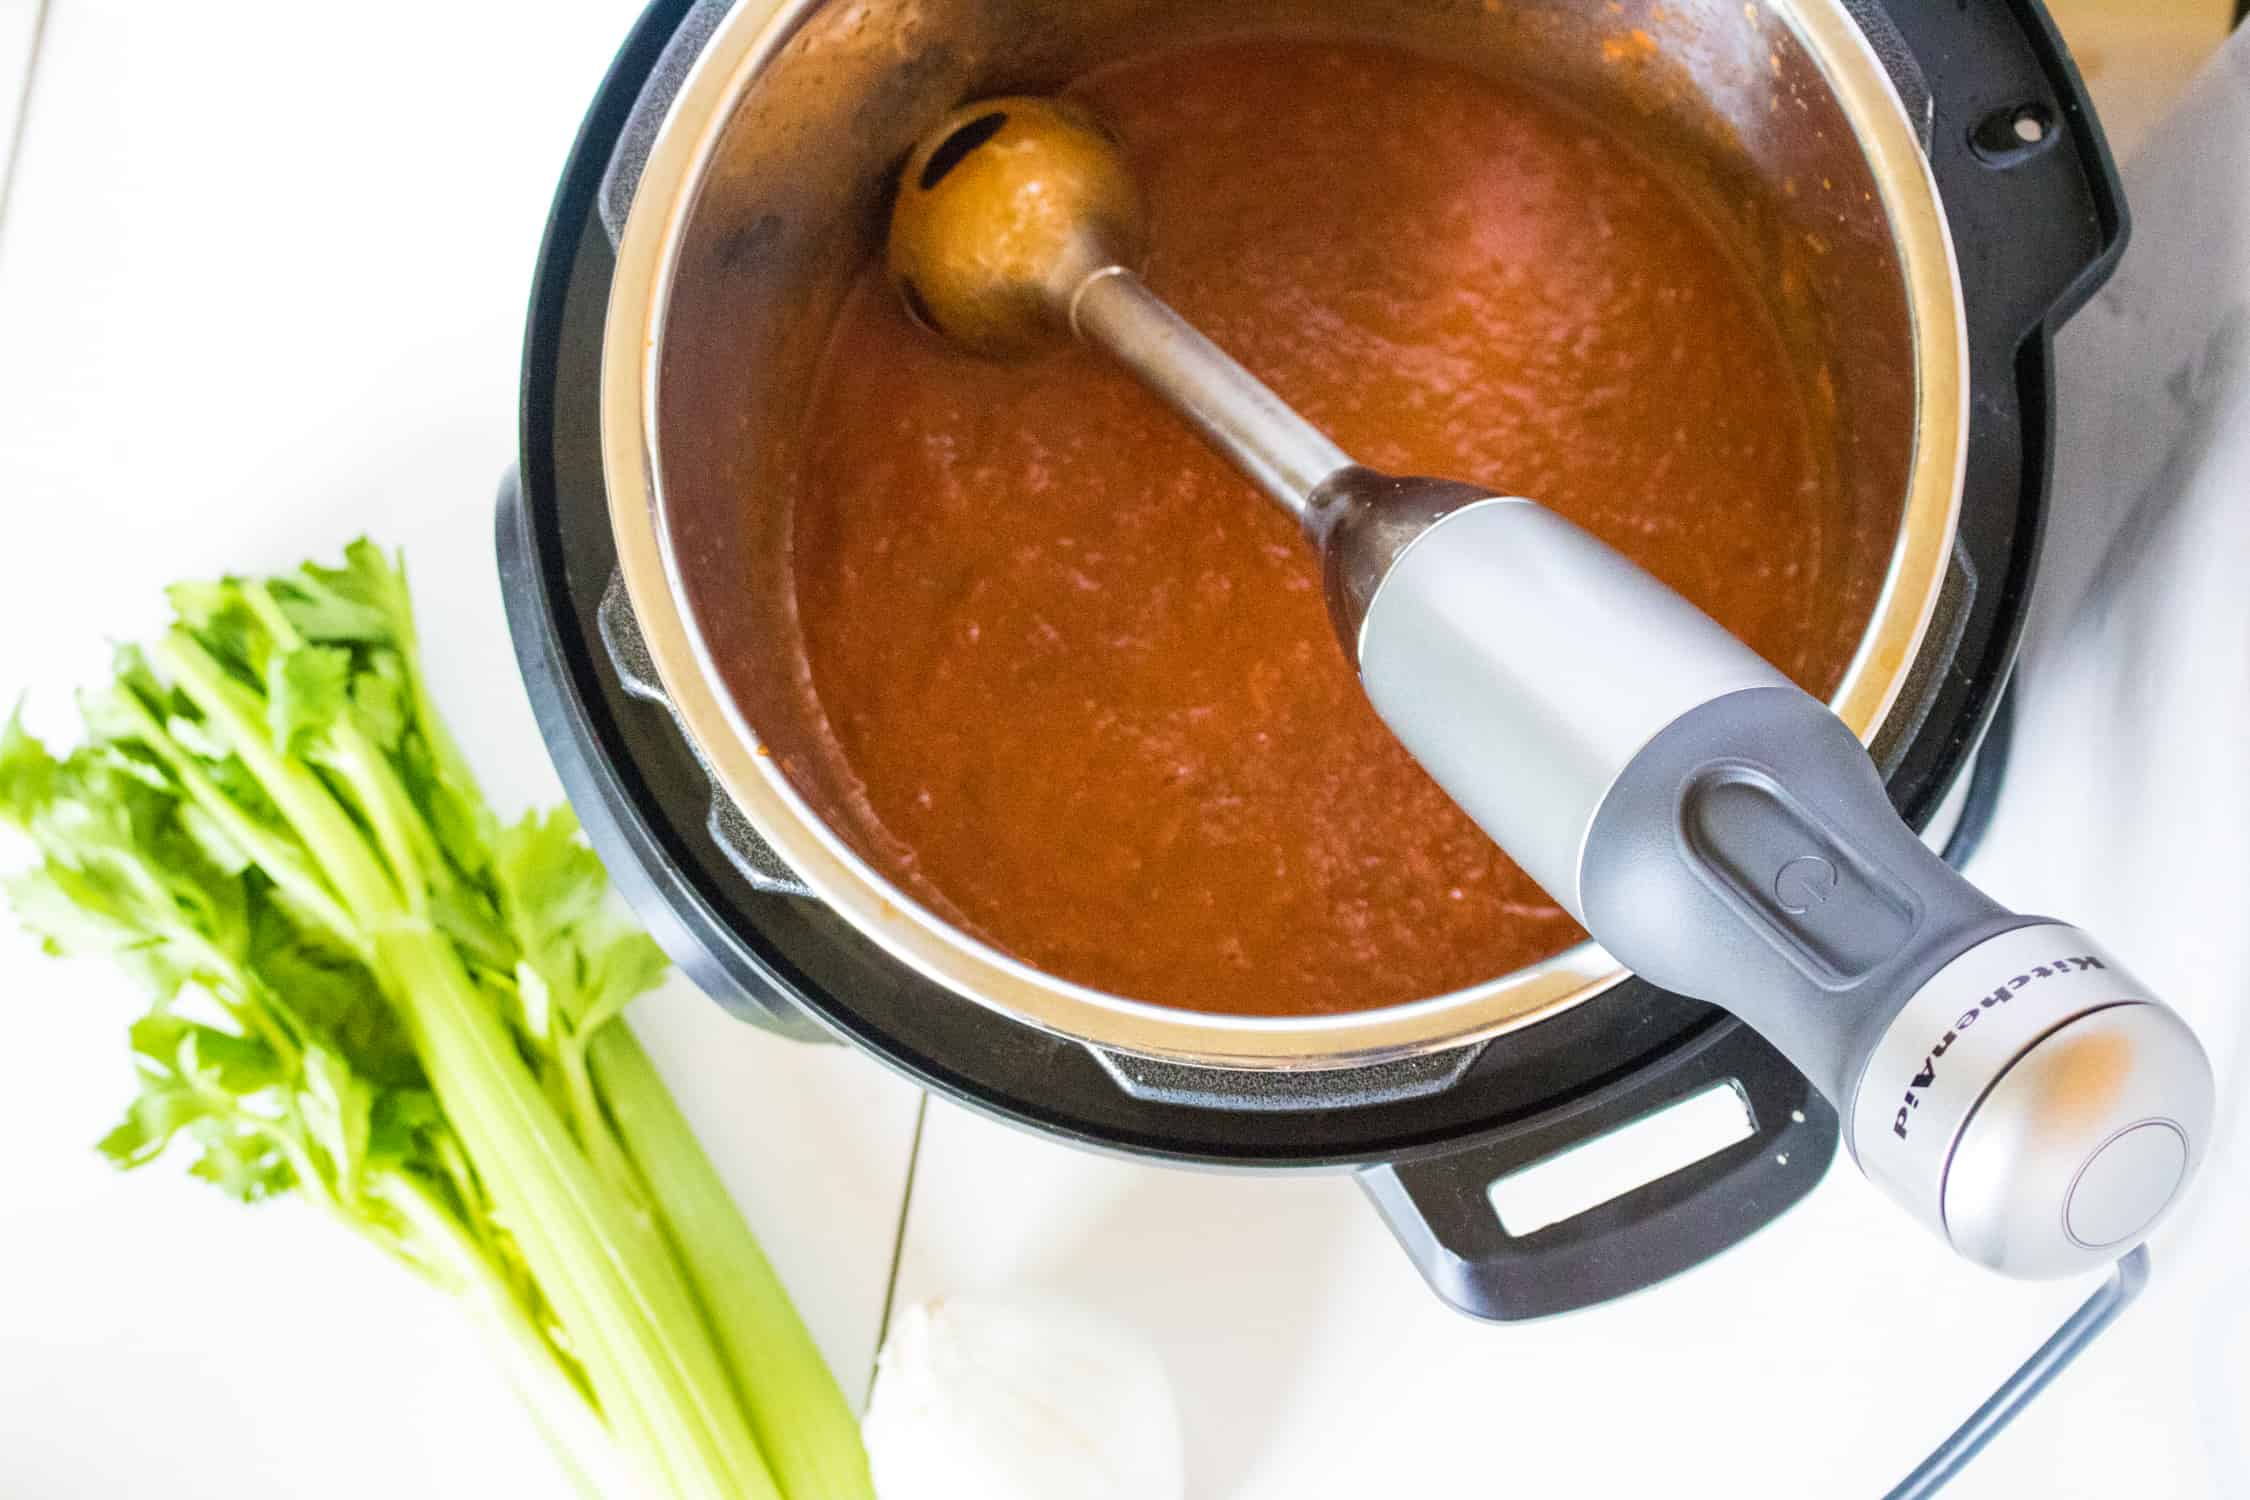 top-down view of cooked Sauce being puréed with an immersion blender inside the instant pot